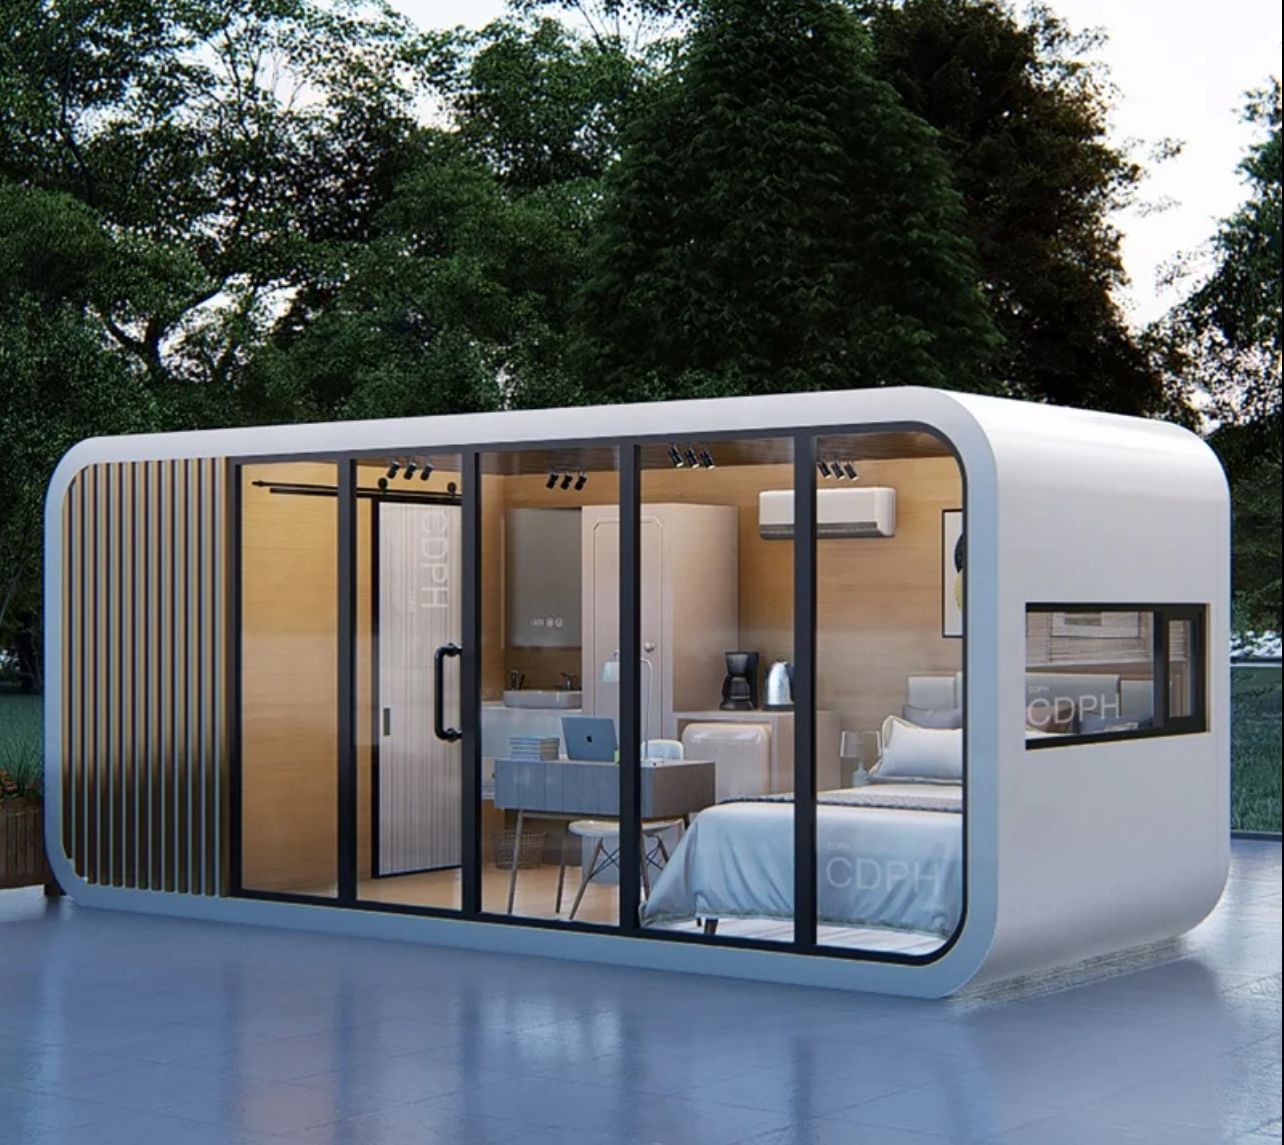 Modular prefab tiny homes container office portable apple home pod movable apple cabin